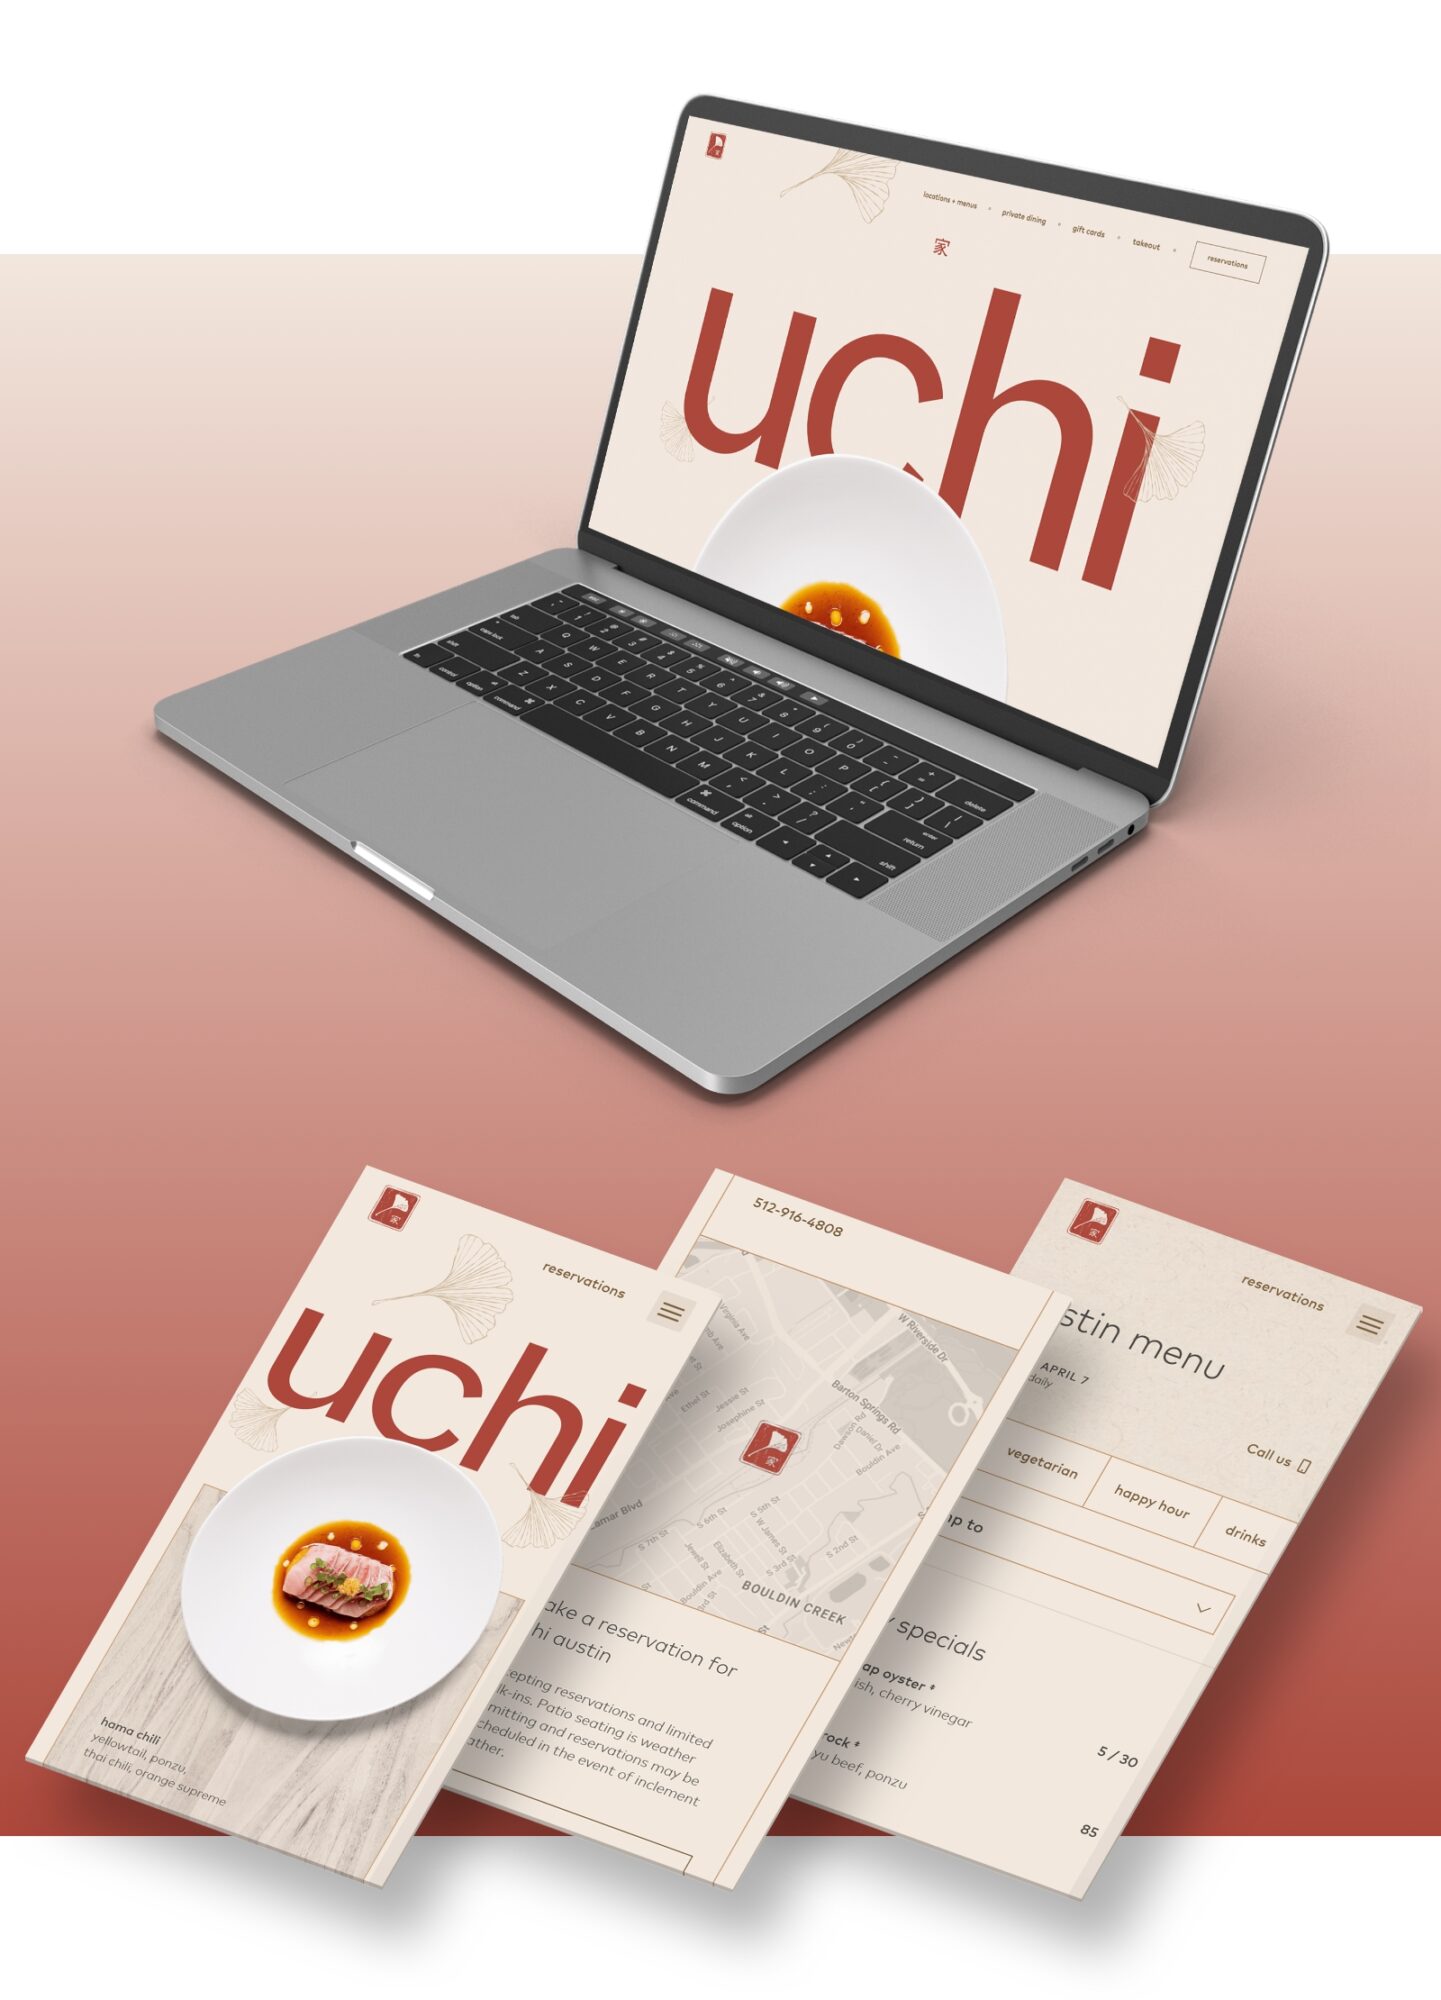 Laptop screenshot of the Uchi website homepage and smartphone screenshots of three interior pages.